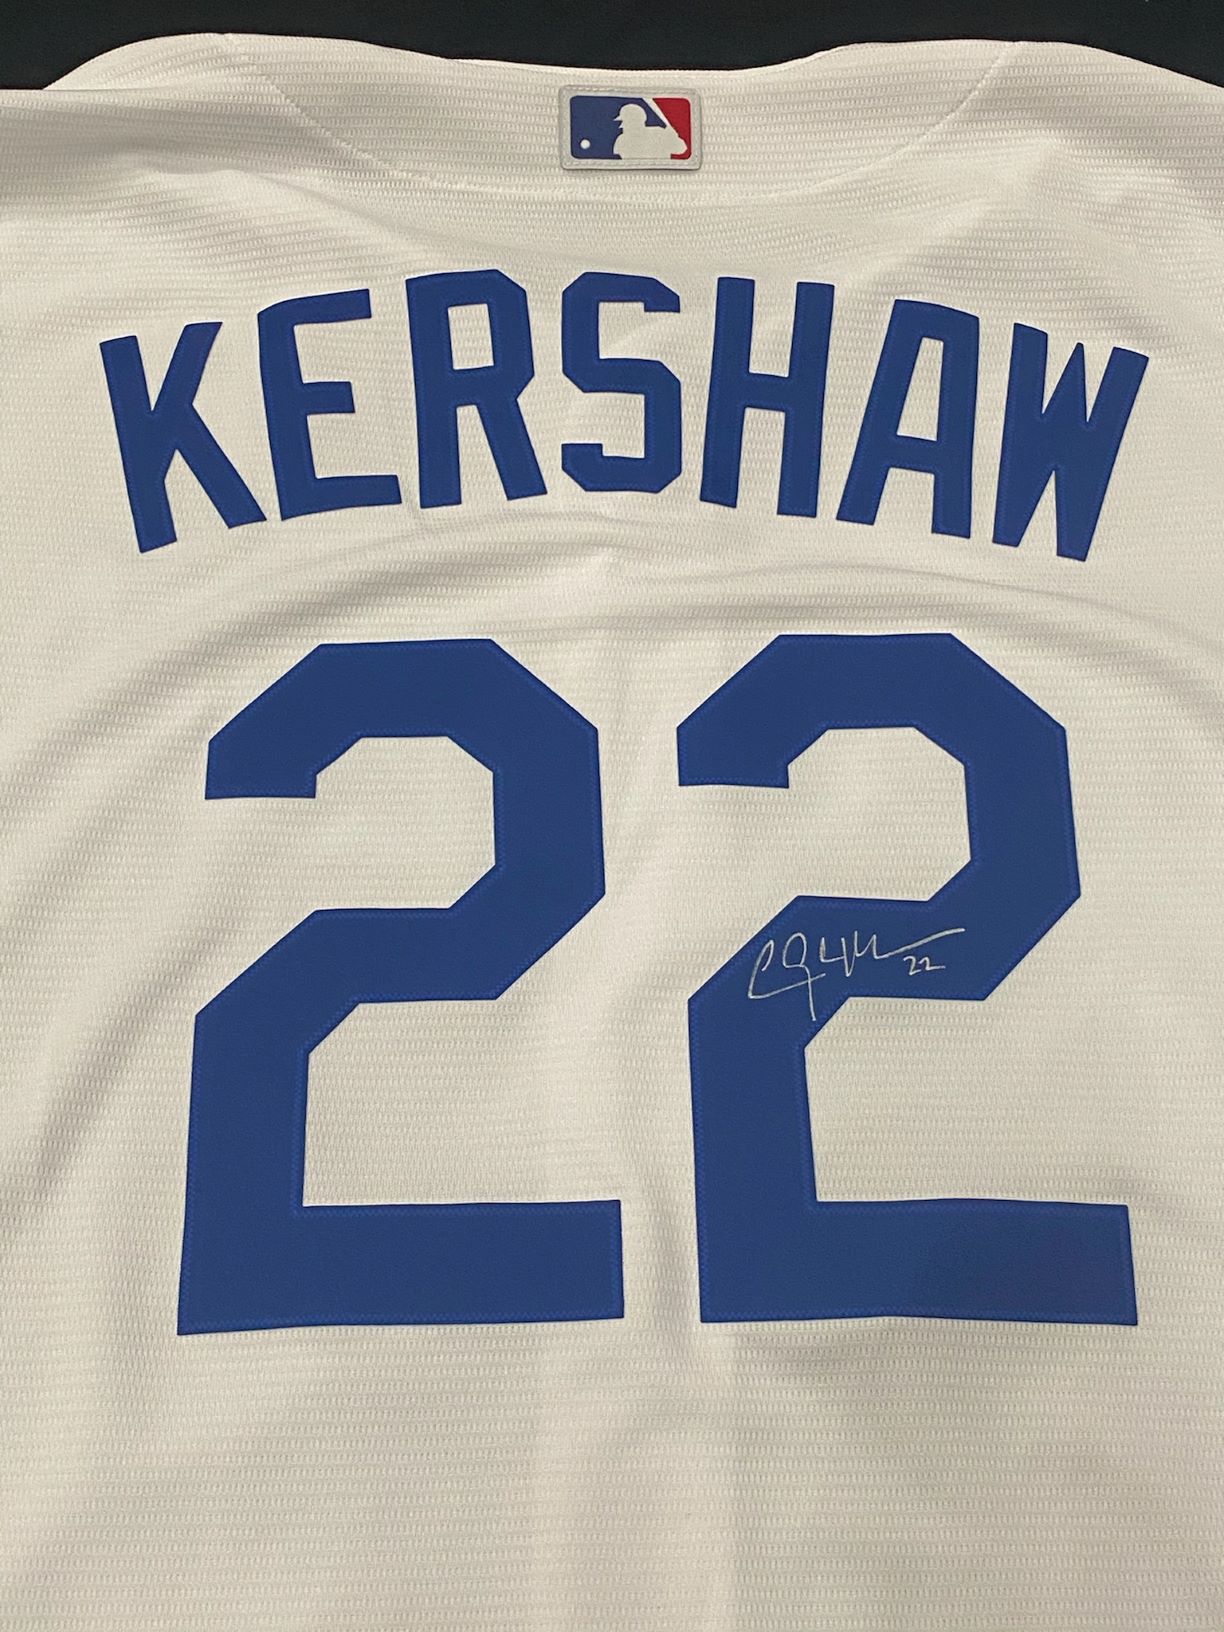 Clayton Kershaw Autographed Replica Jersey